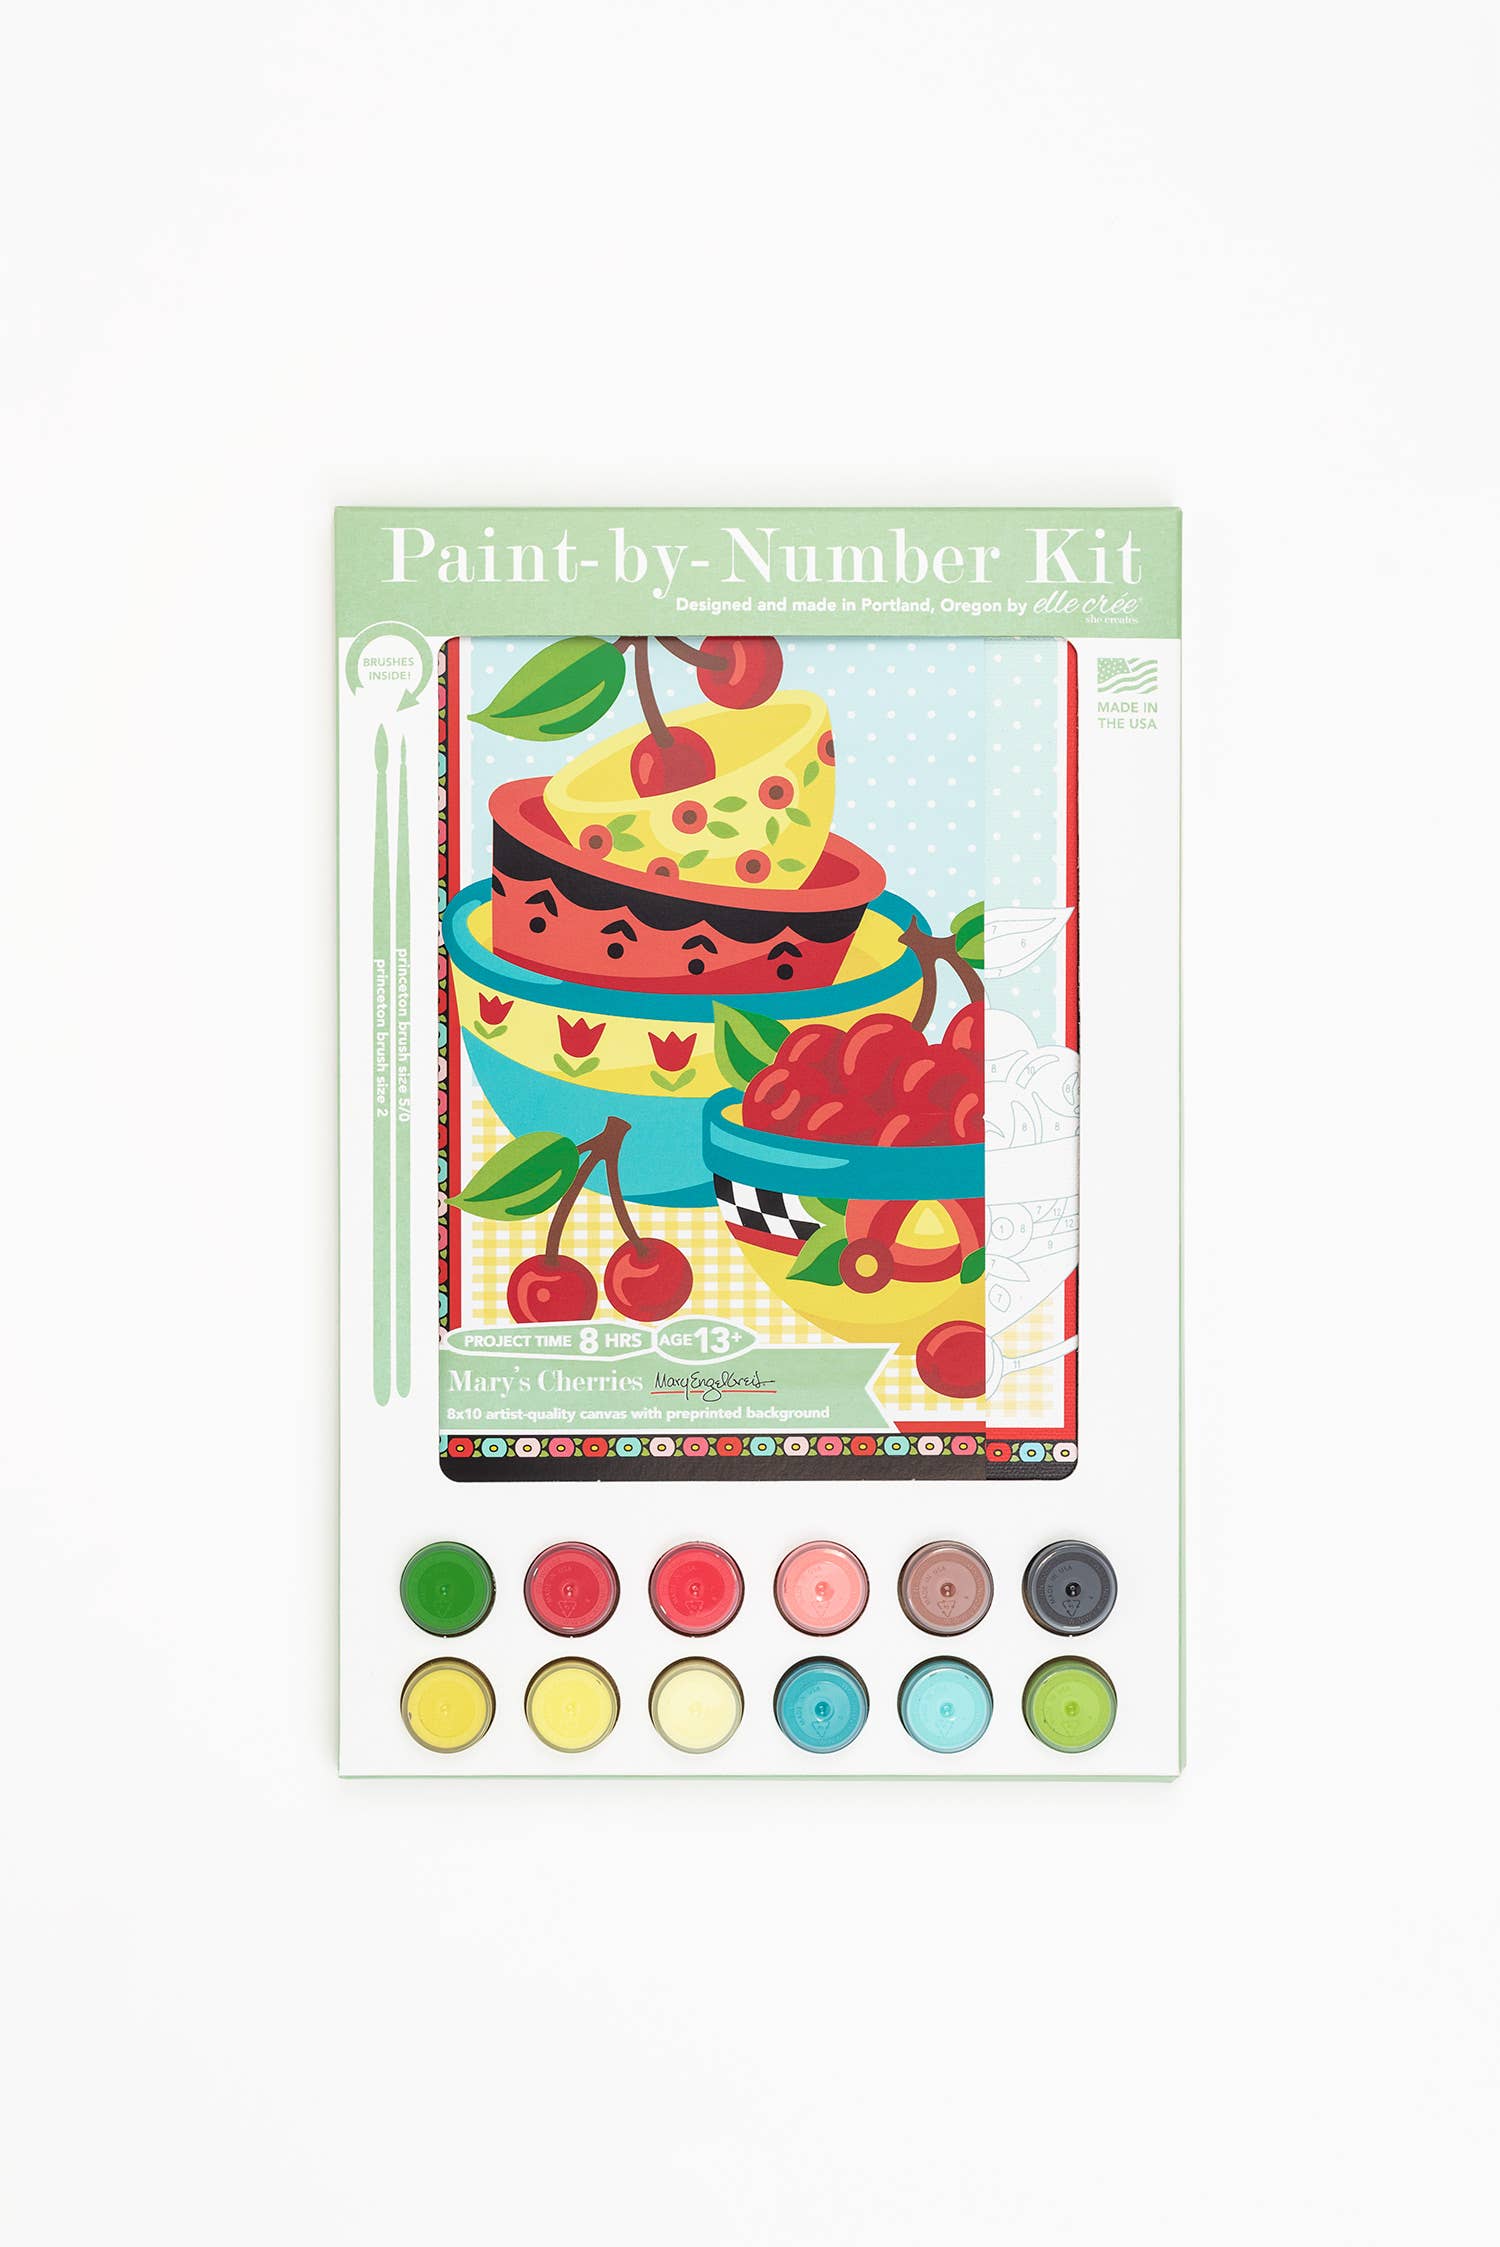 Mary&#39;s Cherries Mary Engelbreit Paint-by-Number Kit